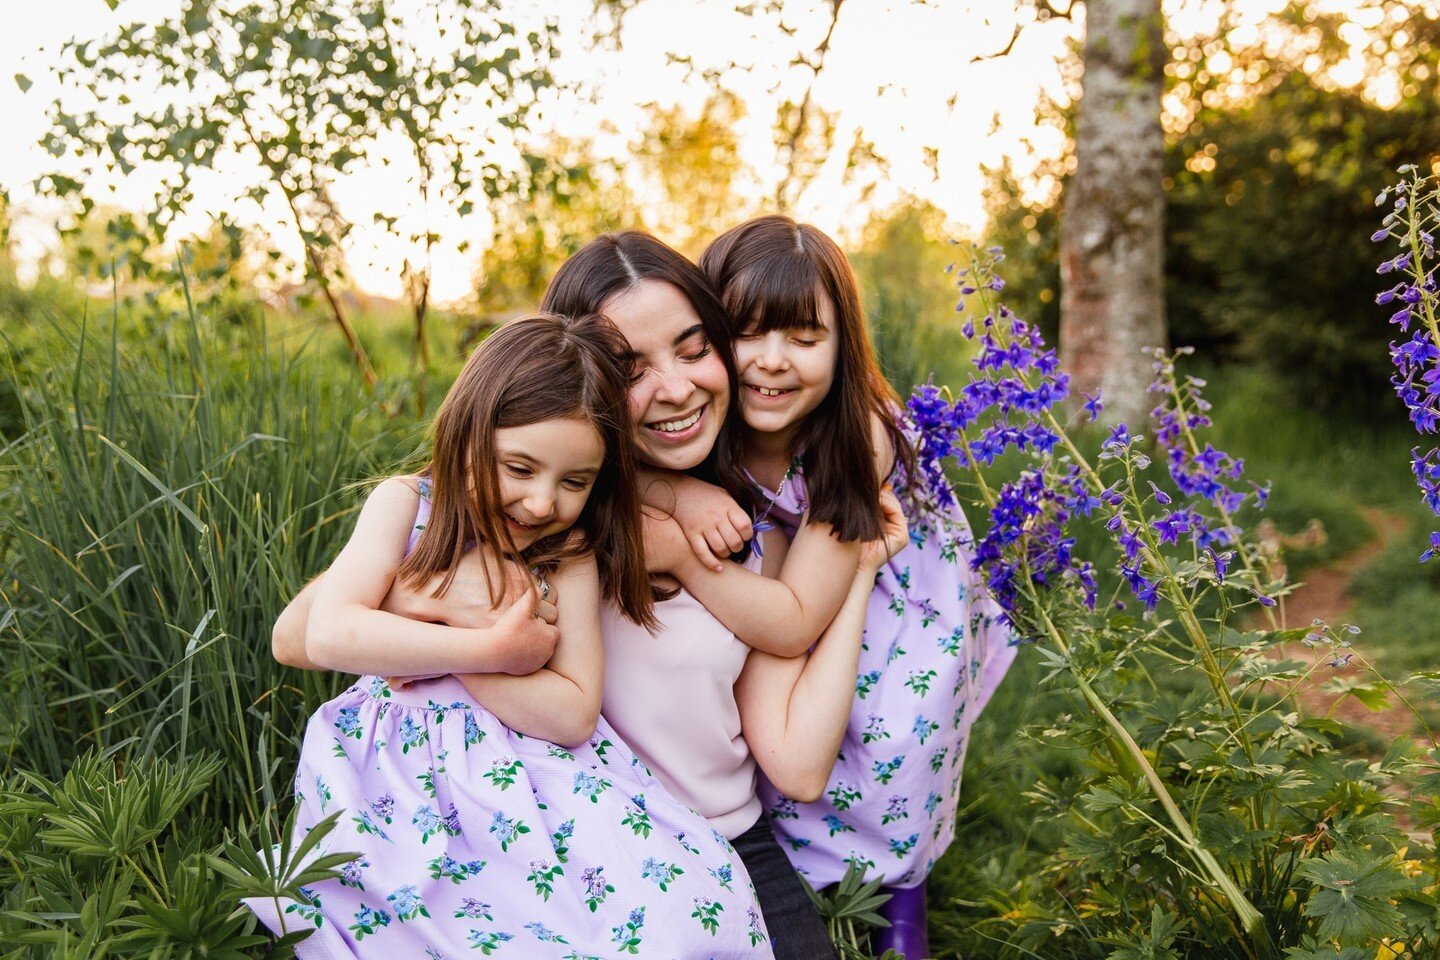 It's not too late to get mom the most thoughtful gift of all... ⁠
family photos of her doing what she does best.⁠
⁠
3 May session spots left, 4 in June! ⁠
⁠
It's a beautiful time to celebrate mom.⁠
⁠
Reach out for calendar availability. I can't wait 